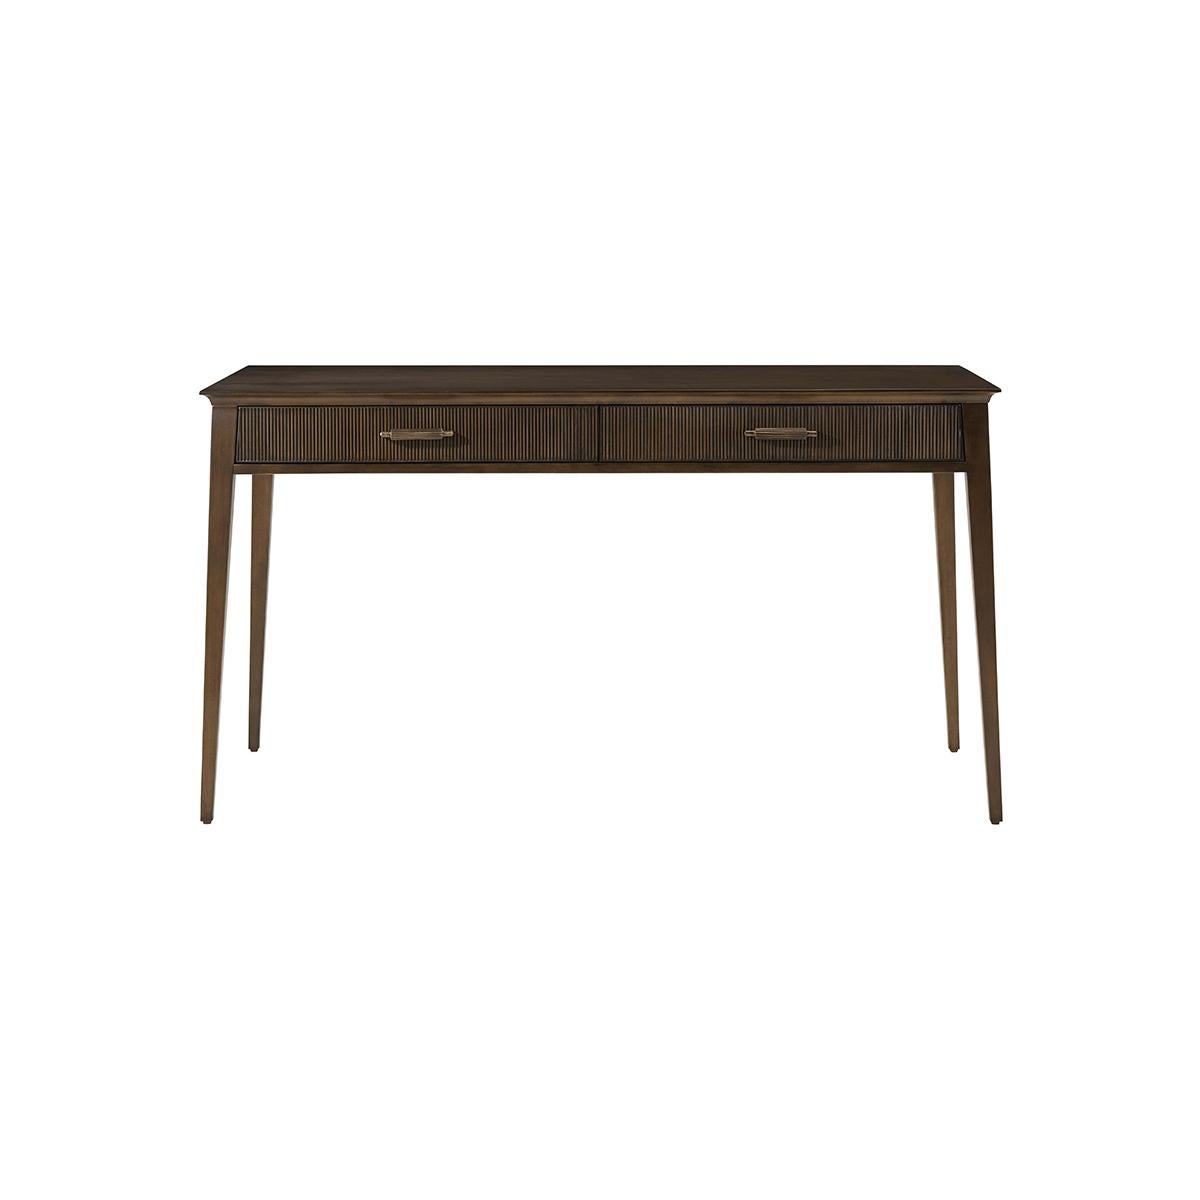 This midcentury inspired writing desk is perfect for those looking for a blend of elegance and modernity in their home office. Crafted from Prima Vera and finished in our Bistre finish, it features a sophisticated tapering Silhouette and reeded